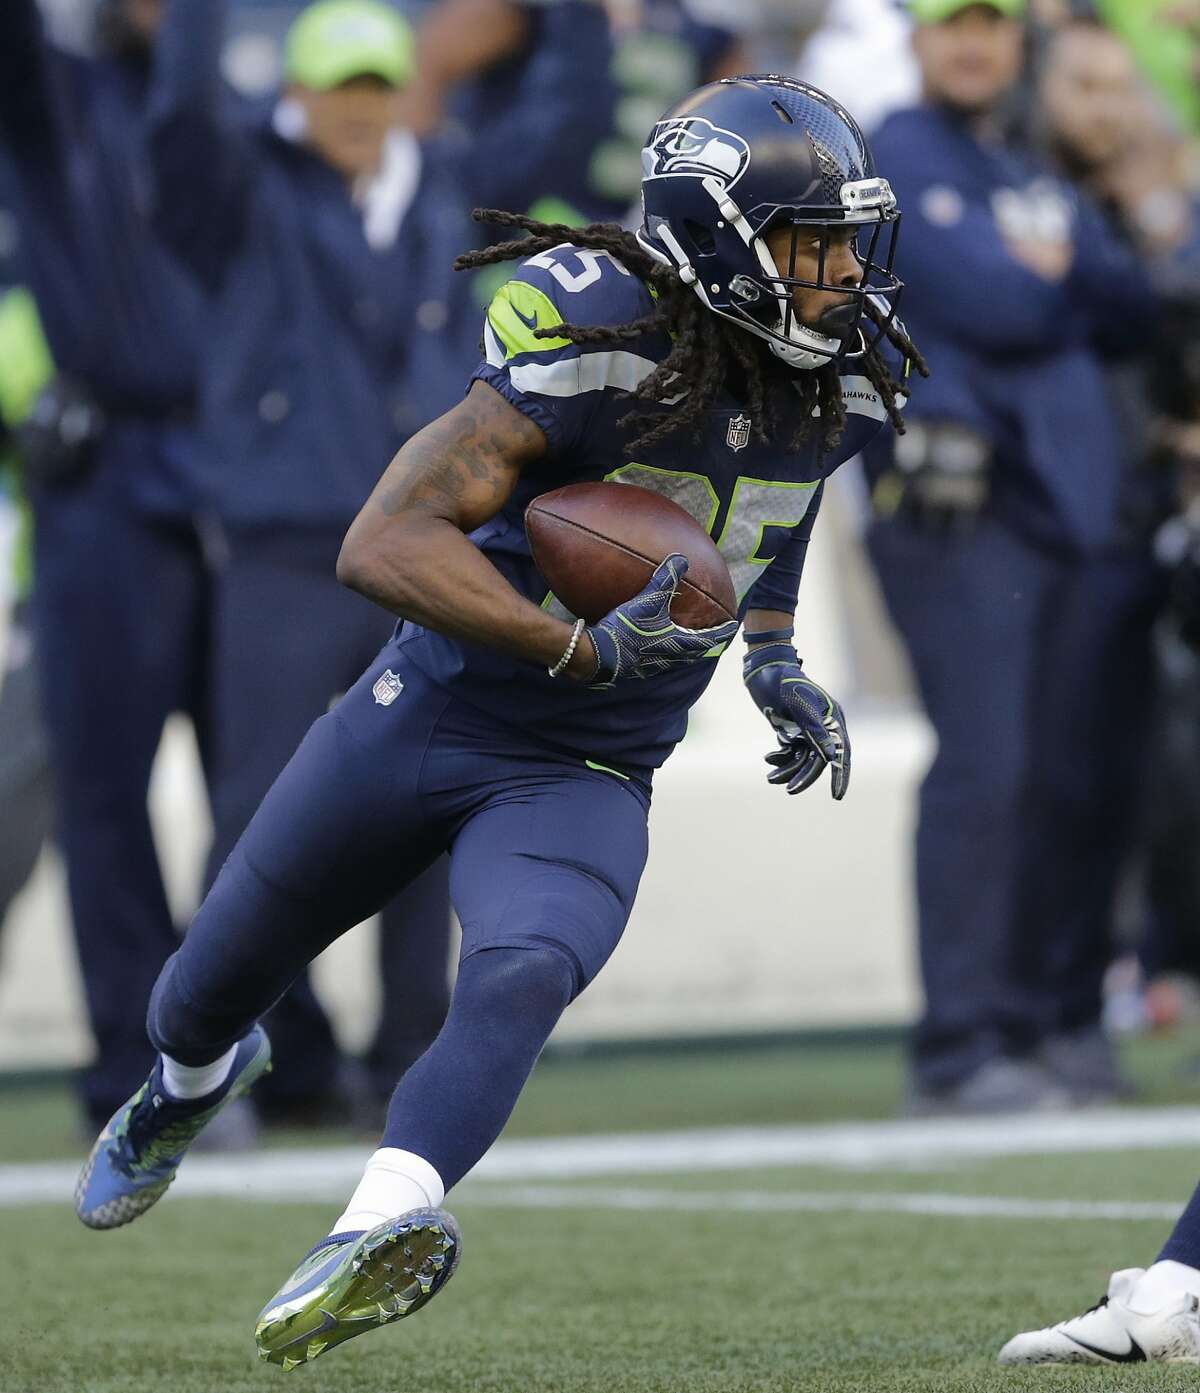 Do you have any regrets about Sherman’s fallout with the team?  Wagner: “Obviously, I was hoping – you hope that you’re able to play a long time with the people that you came into this game with. I think for me, it was kind of like a cool situation for him because he ended up in San Francisco, where he went to college at and was still in California, where his family is close. He still has his house in Seattle so it’s not like I’m not ever going to ever see him ever again in life. From that standpoint, it was all love. You understand it’s a business and the team’s going to make the best decision for themselves and he’s going to make the best decision for him. Sometimes, it means parting ways. I don’t really have any regret or anything like that. For me, as a friend, it’s just being supportive and making sure at the end of the day, he’s happy.”